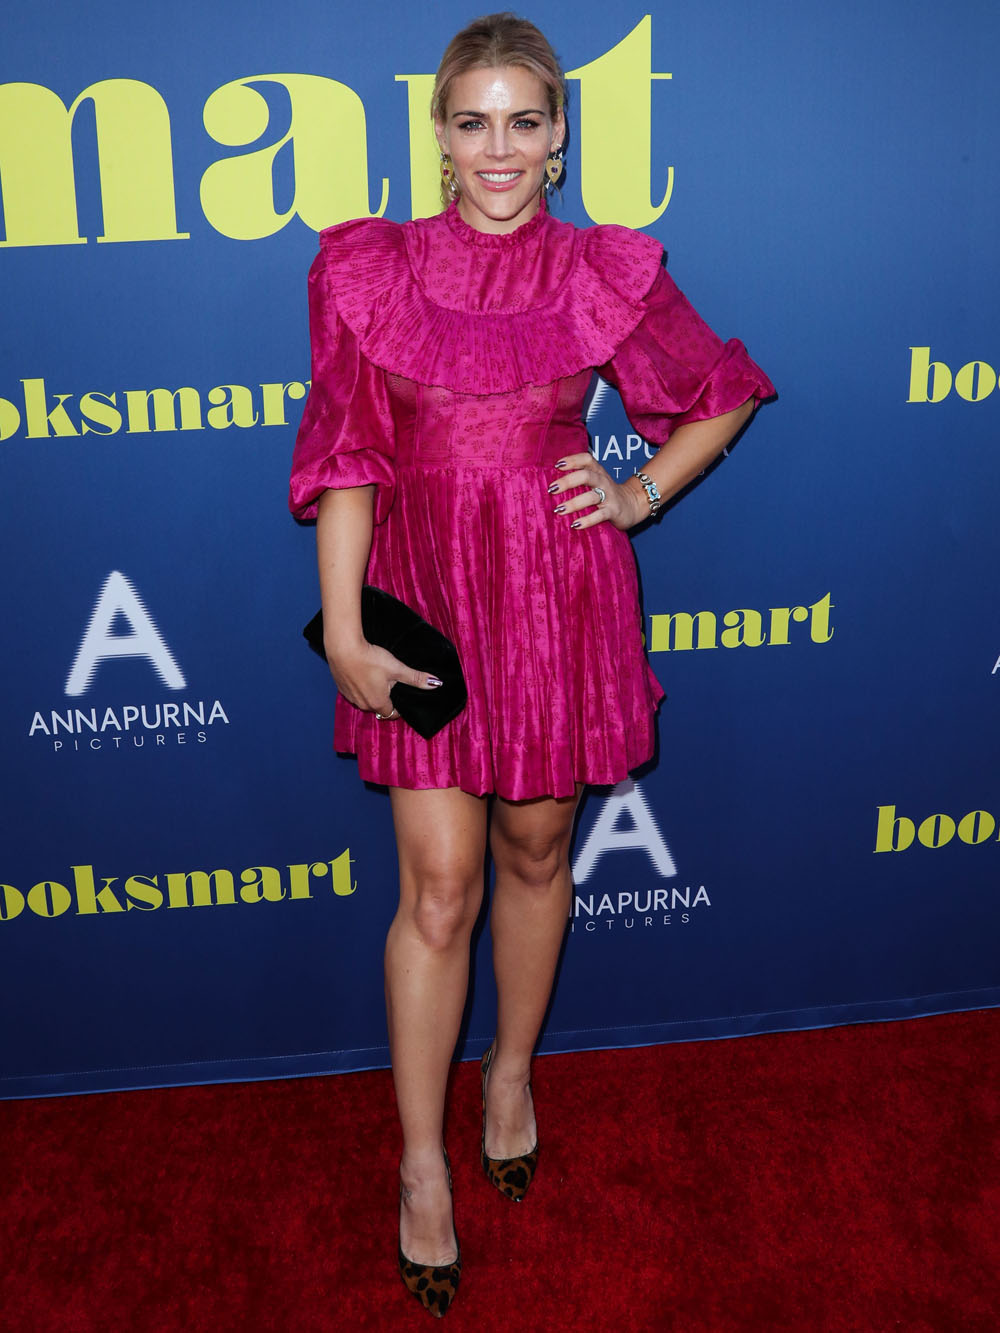 Actress Busy Philipps arrives at the Los Angeles Special Screening Of Annapurna Pictures' 'Booksmart' held at the Ace Hotel on May 13, 2019 in Los Angeles, California, United States. (Photo by Xavier Collin/Image Press Agency)